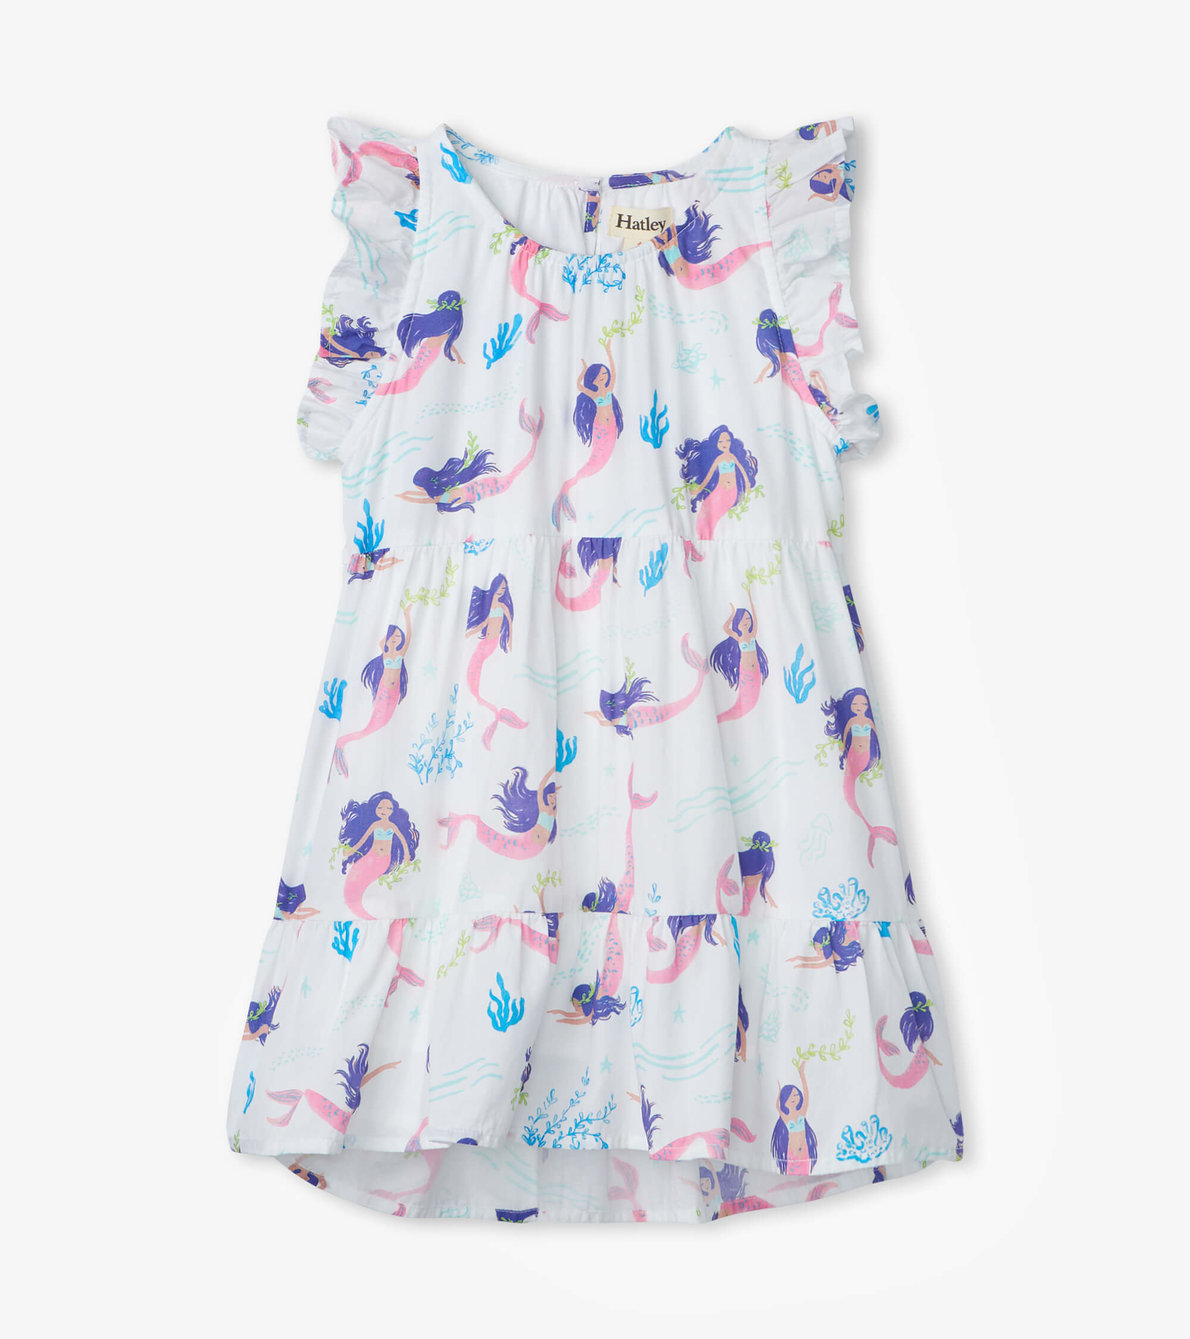 View larger image of Whimsical Mermaids Ruffle Sleeve Dress